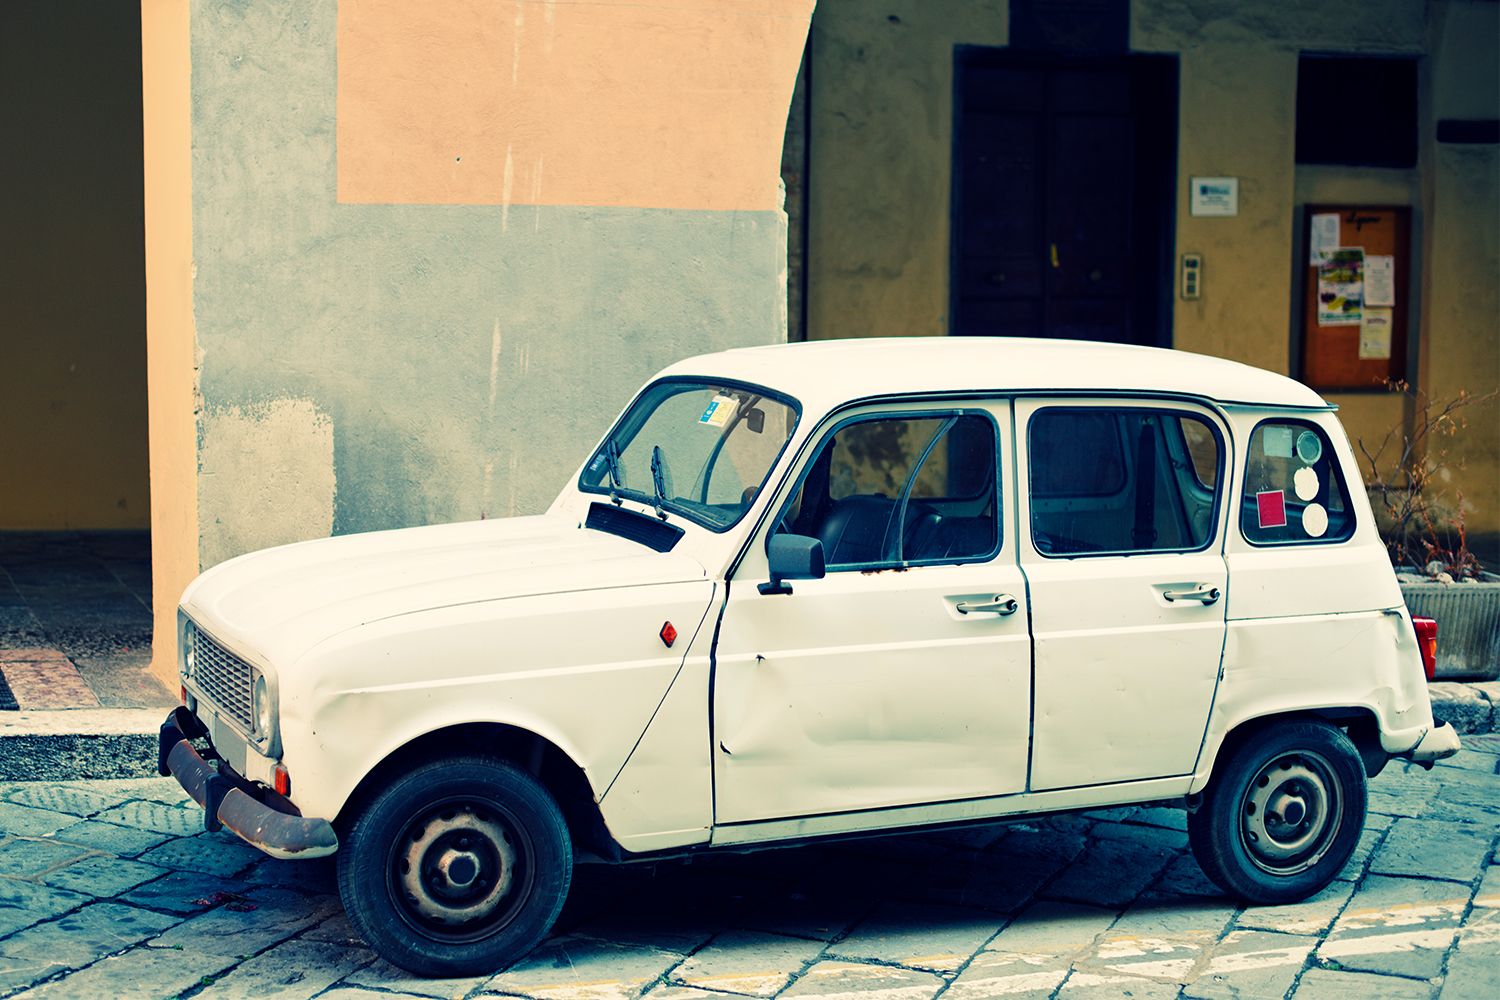 The Renault 4, an unassuming little car that was a favorite in Colombia and one that Pablo Escobar once used for racing